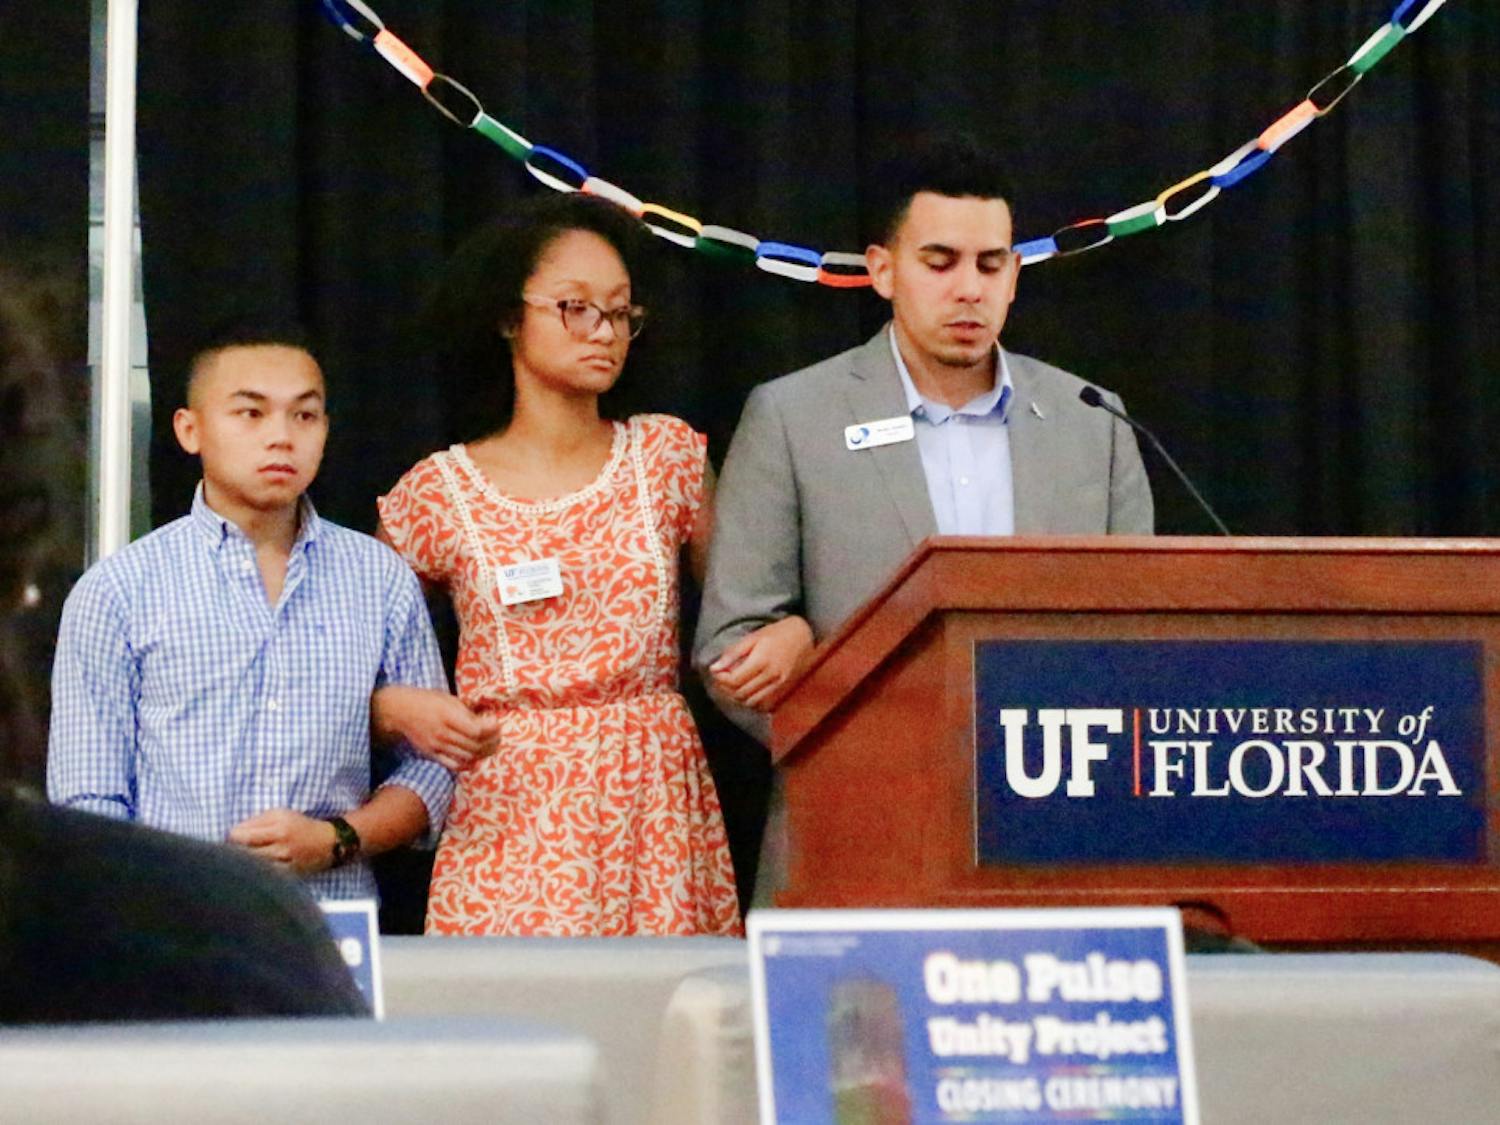 UF’s Multicultural &amp; Diversity Affairs executive director Lloren Foster speaks on Thursday morning at the closing ceremony for the One Pulse Unity Project, asking the crowd for a moment of silence to honor the victims of the Pulse shooting. Foster concluded everyone present was, "here to show solidarity not only for victims, families and communities… but for each other."